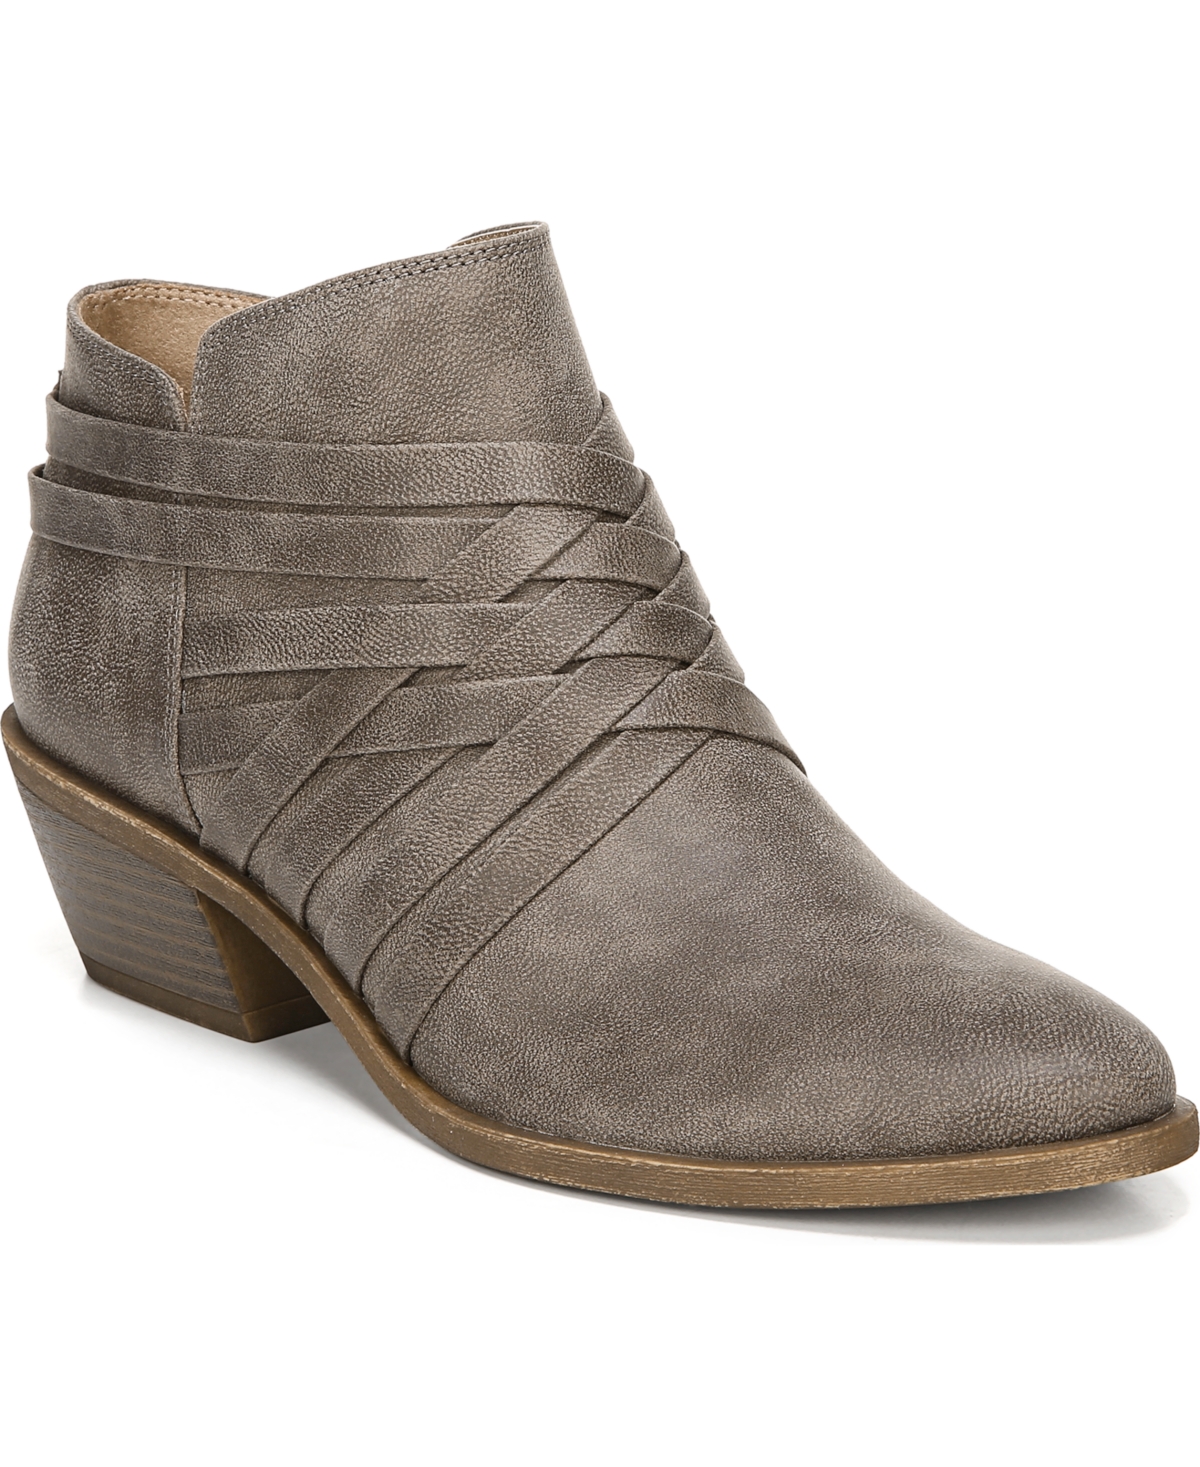 Prairie Booties - Ash Faux Leather